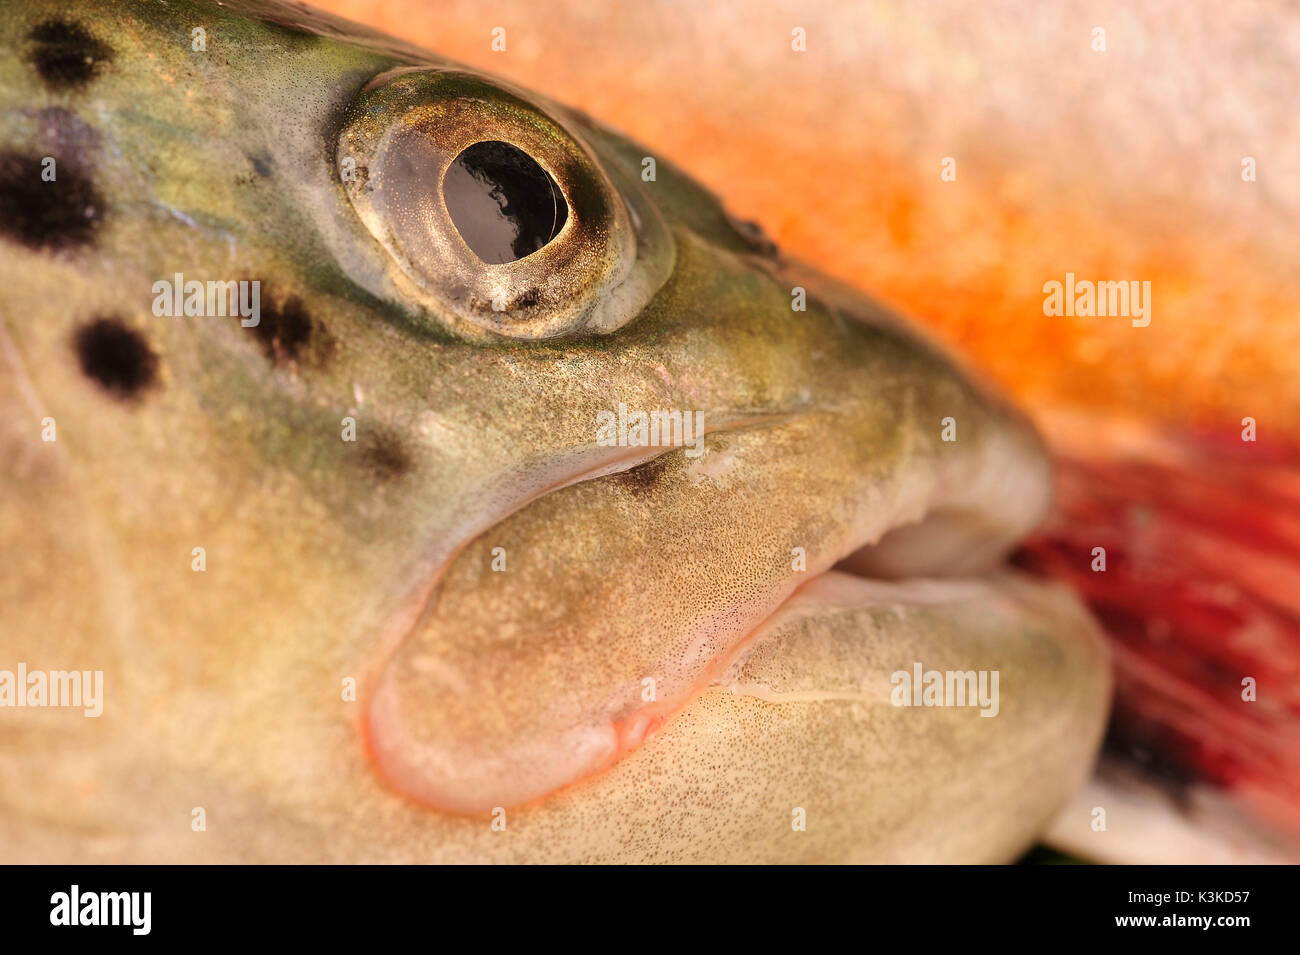 Medium close-up of the fish shell of a lake trout with fish scales and fin Stock Photo